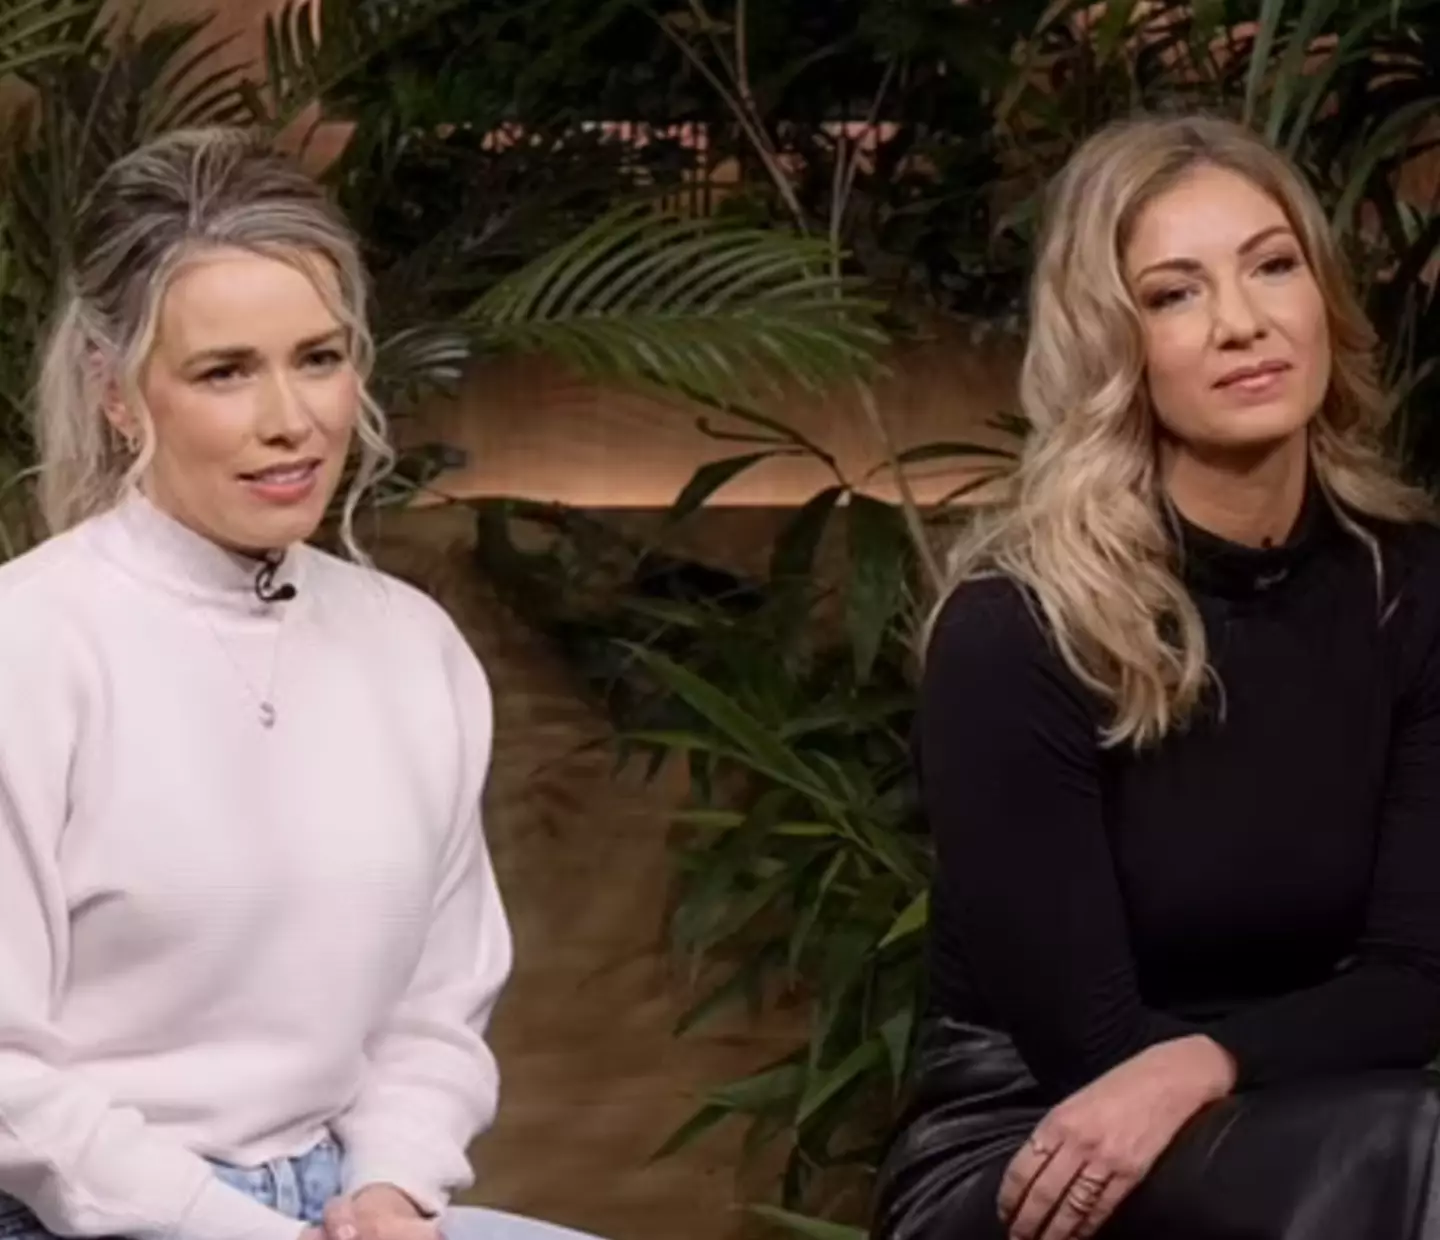 The First Dates stars appeared on This Morning.